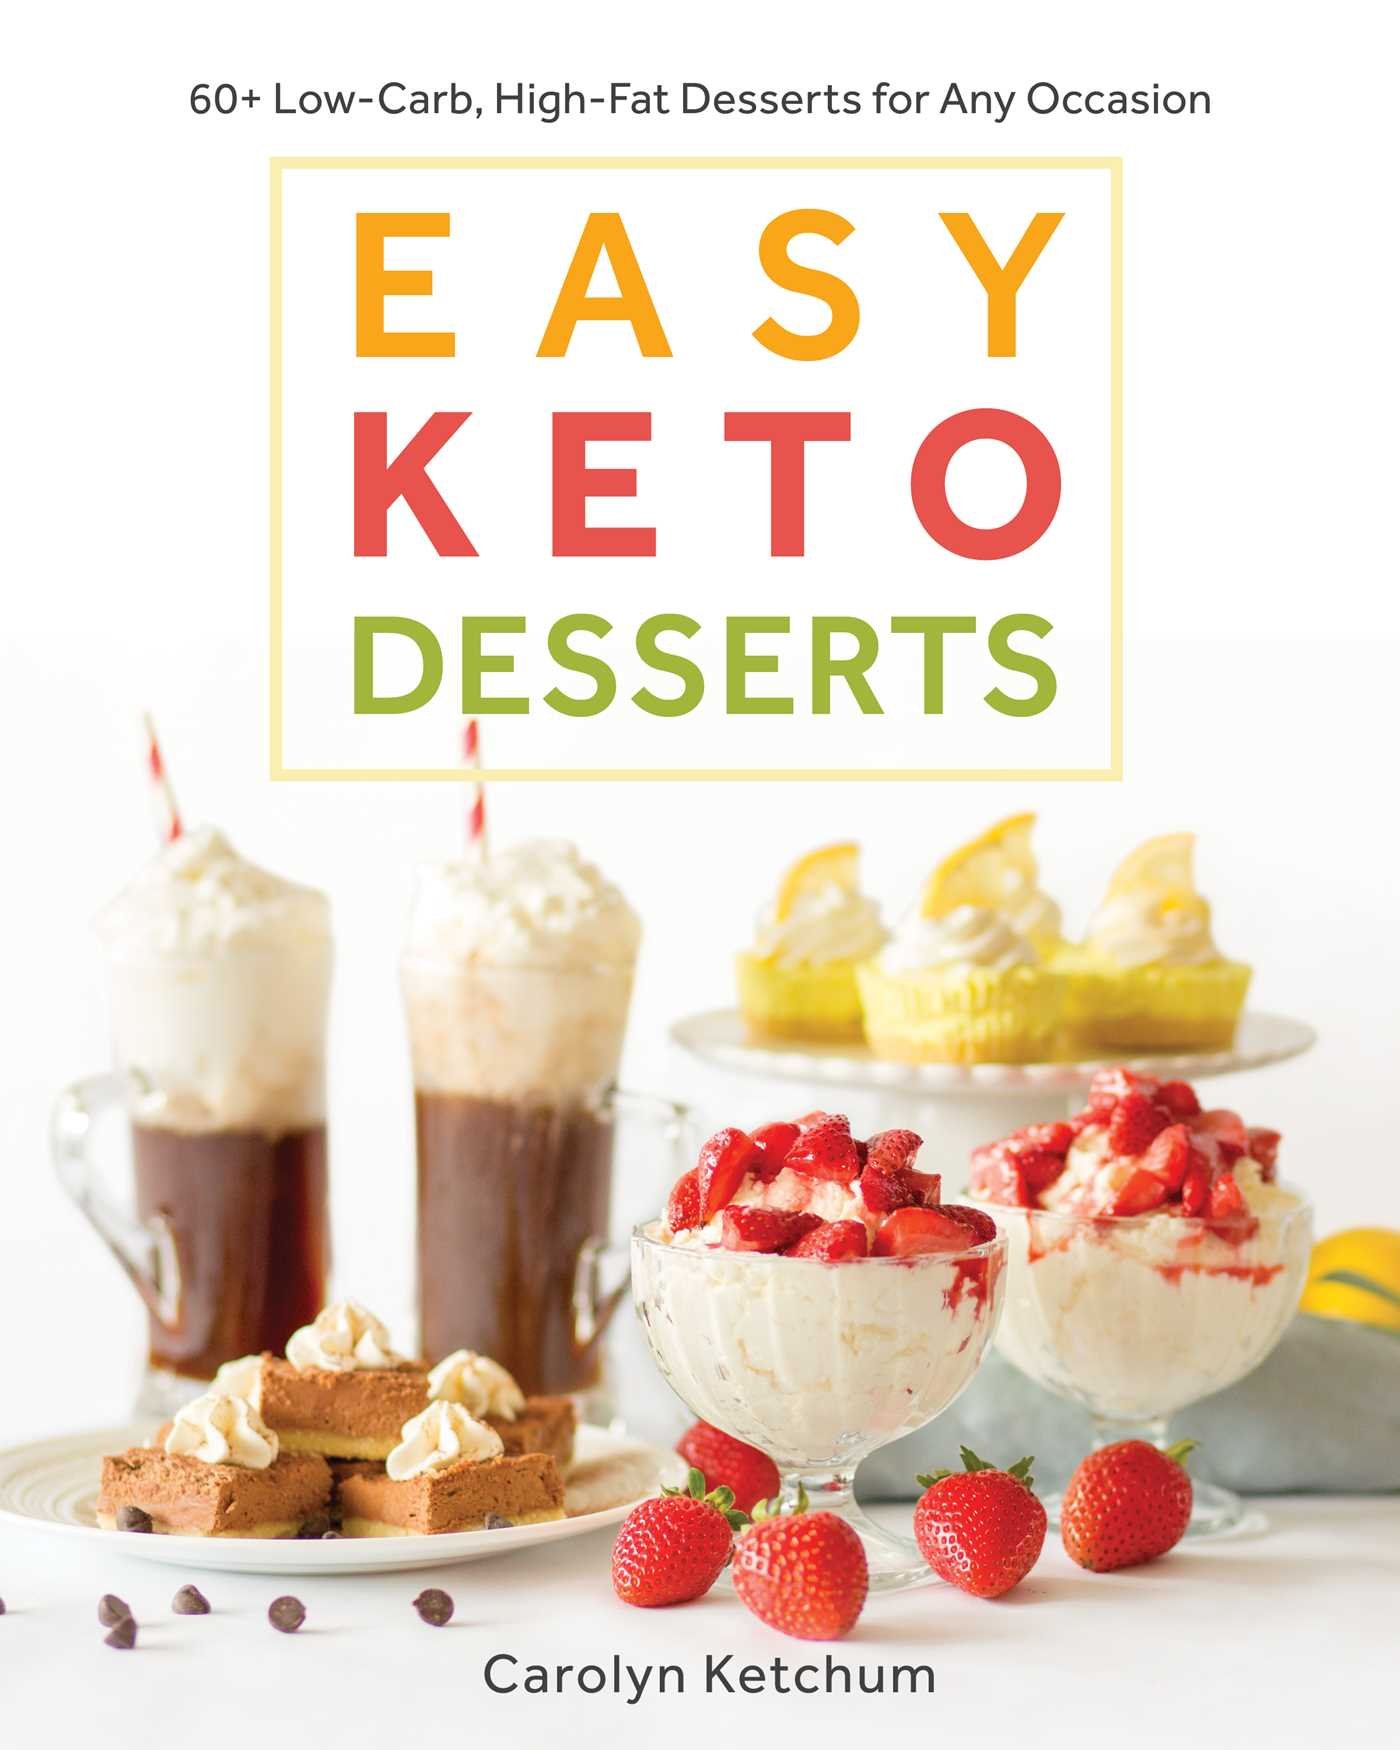 Easy Keto Desserts: 60+ Low-Carb, High-Fat Desserts for Any Occasion